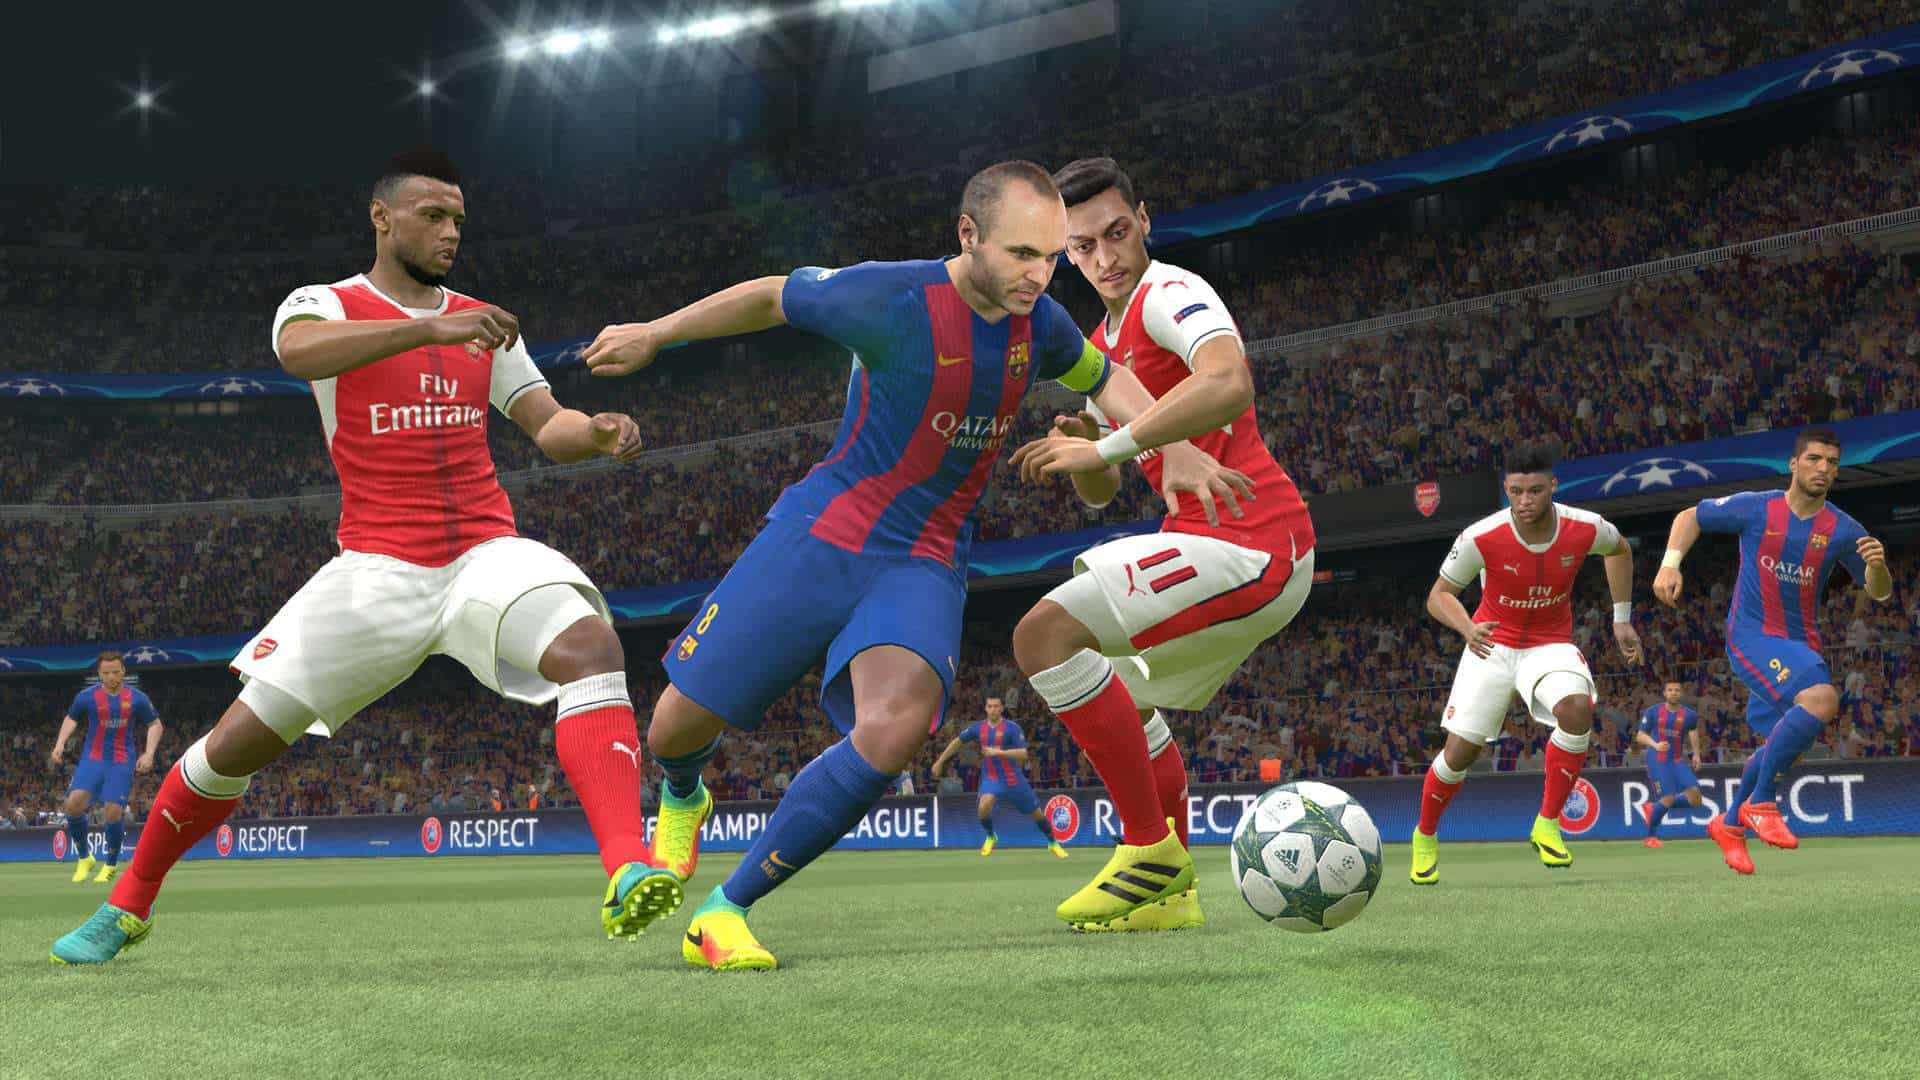 pes 2017 with crack download